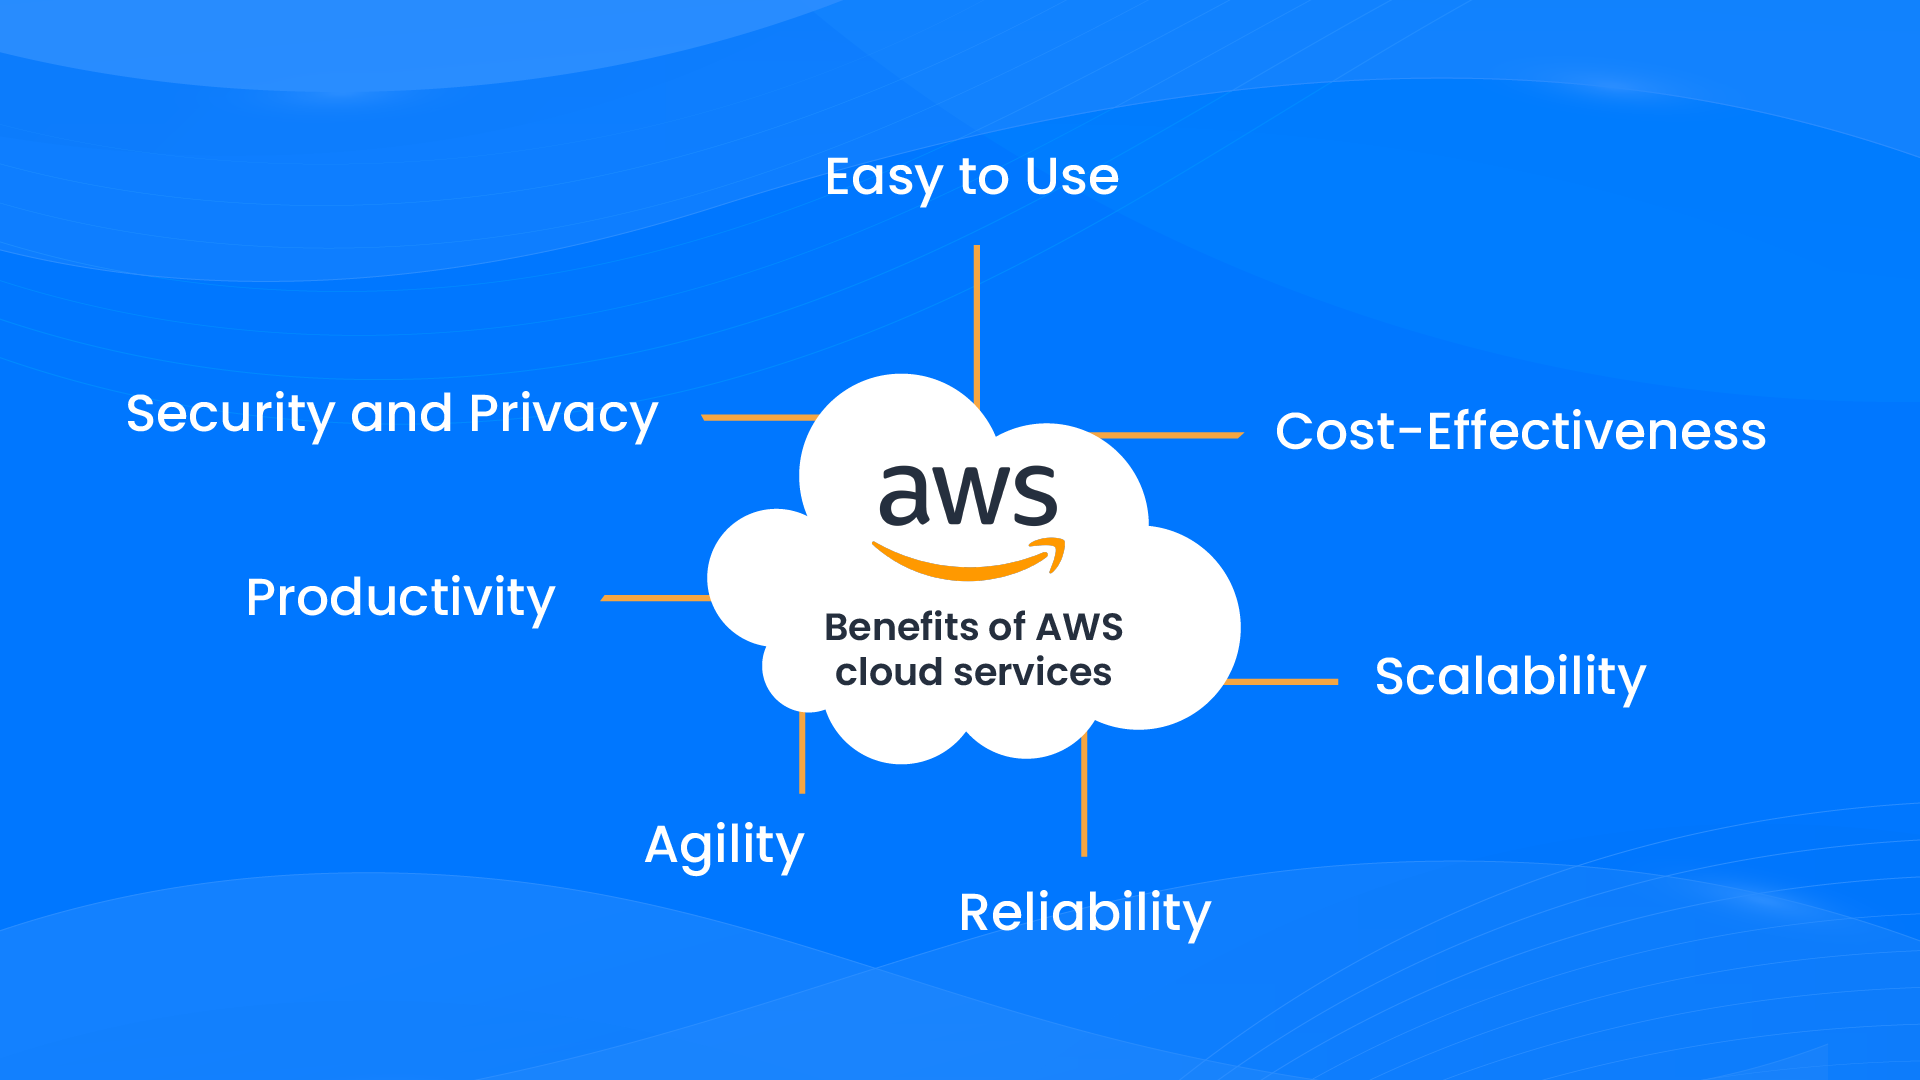 Benefits of AWS cloud services